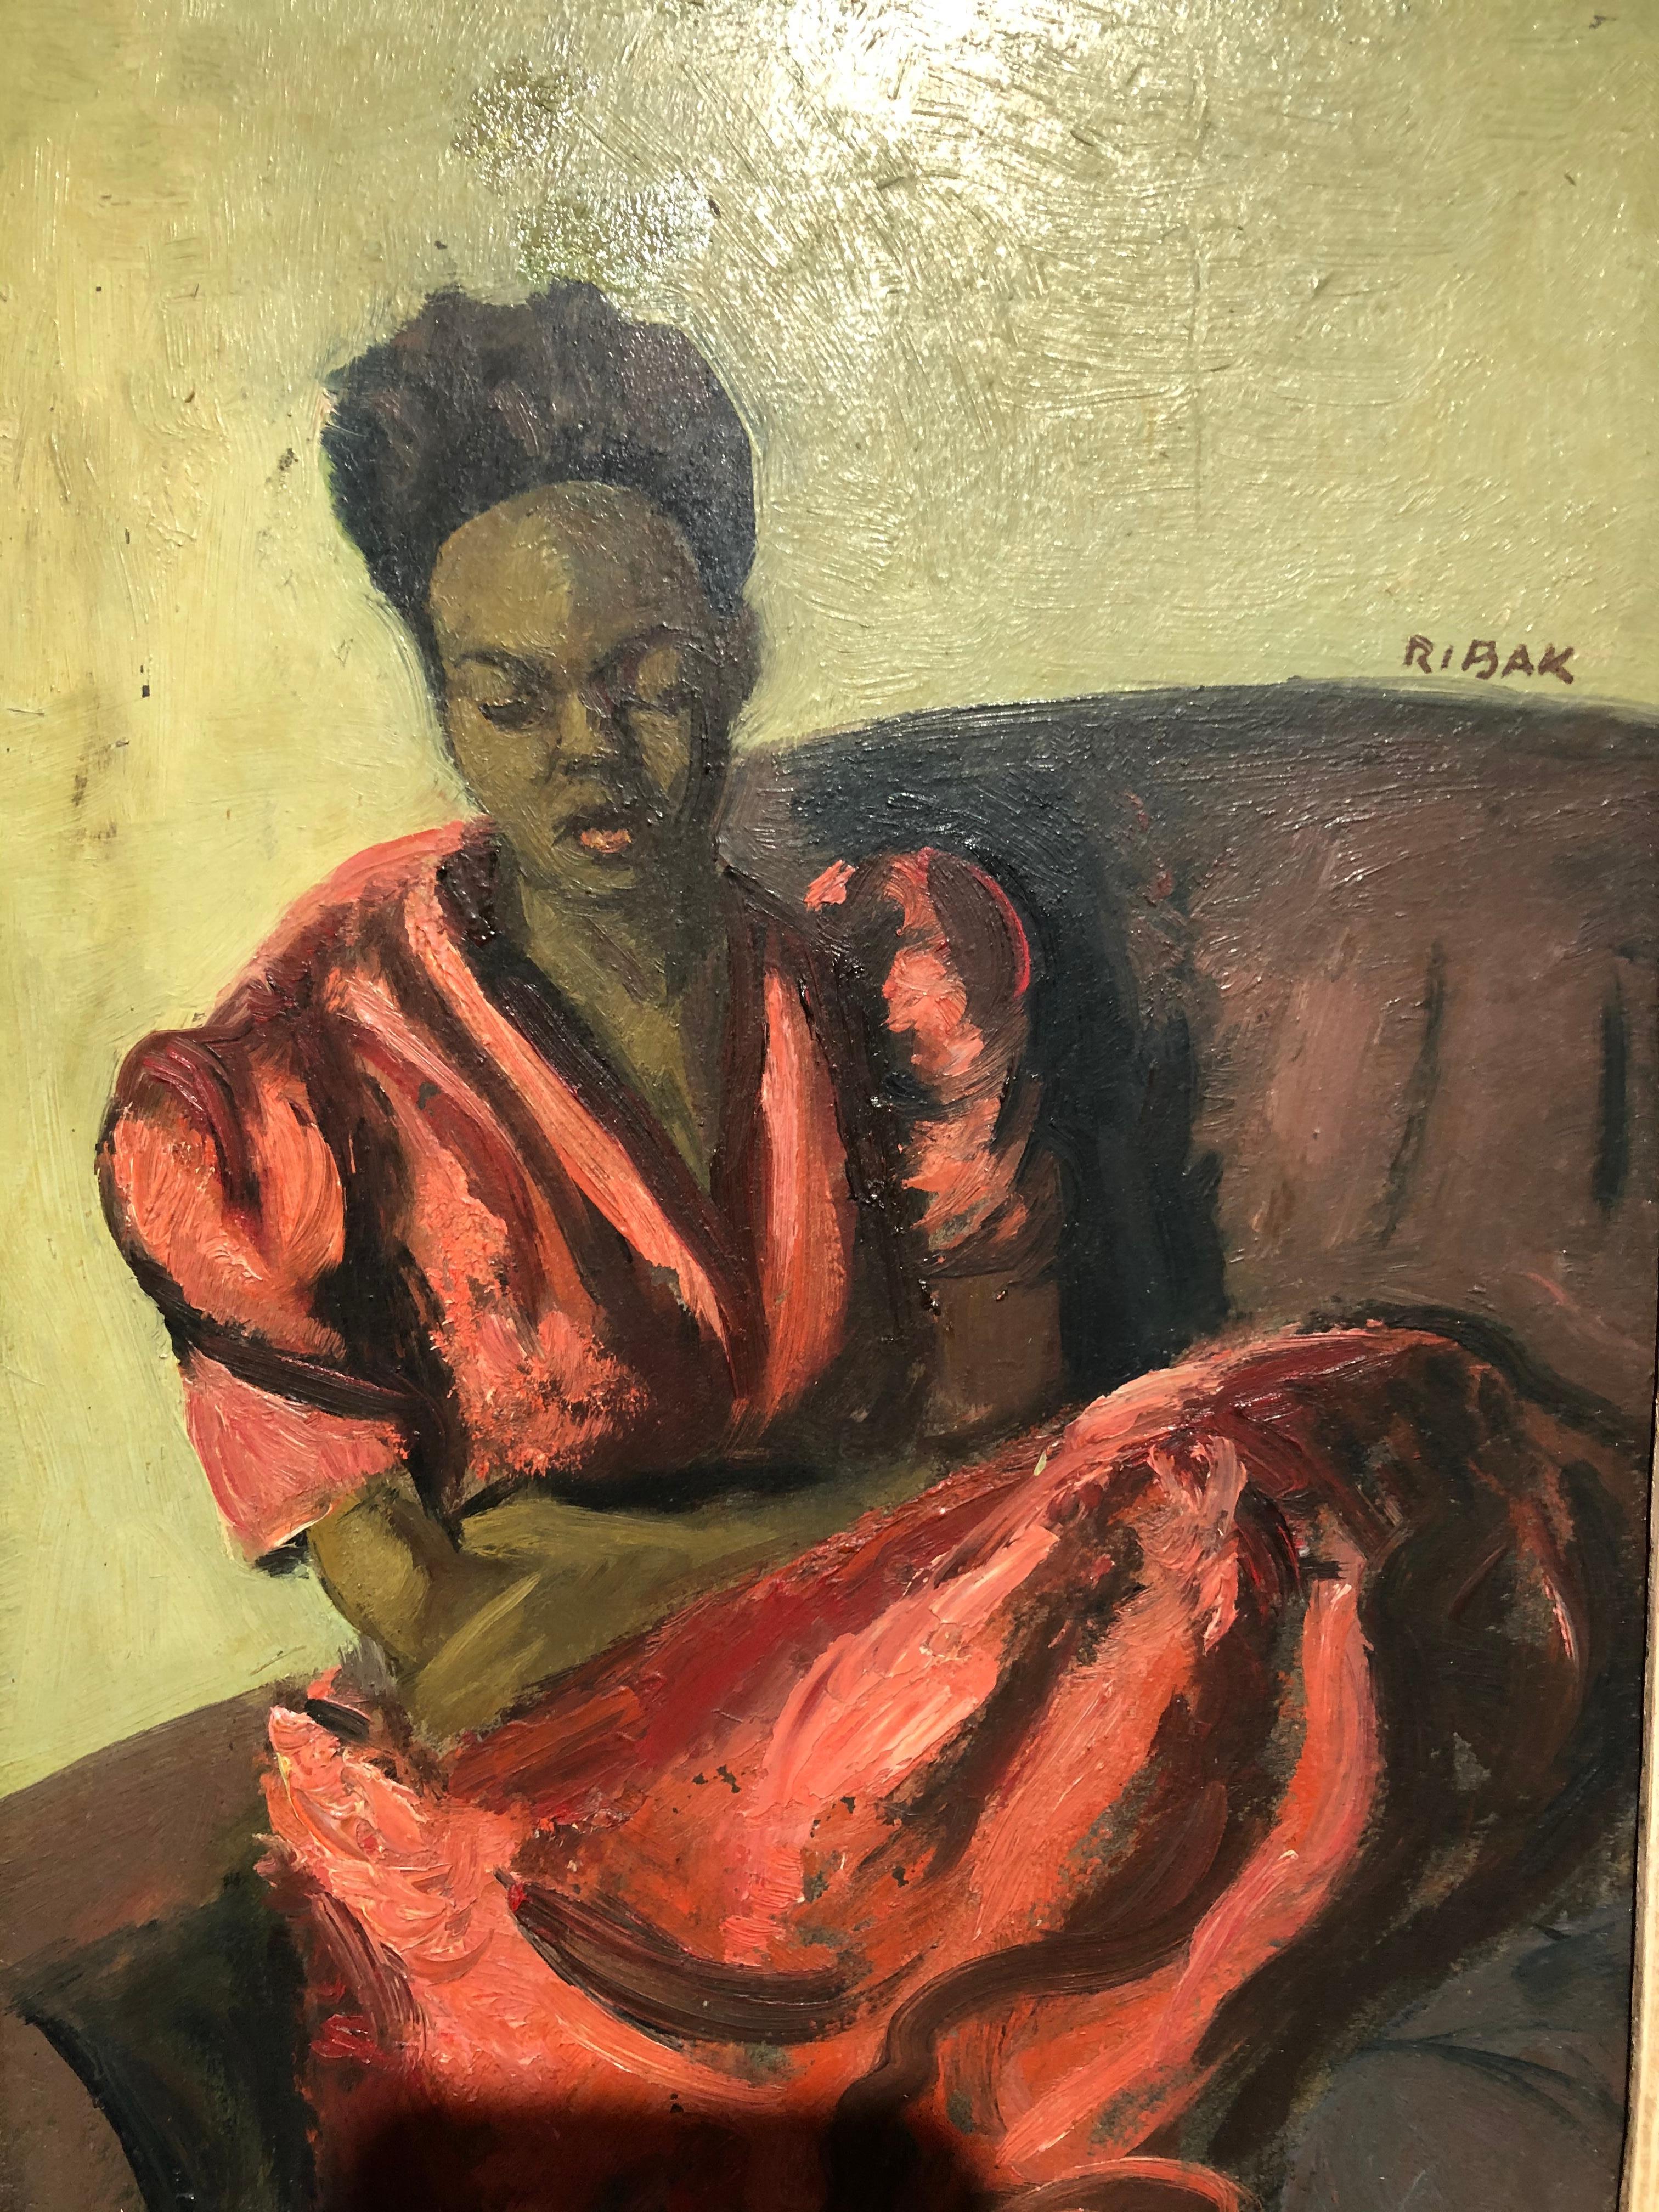 Oiled Louis Leon Ribak Oil ainting “ruby in red” Social Realist Style For Sale